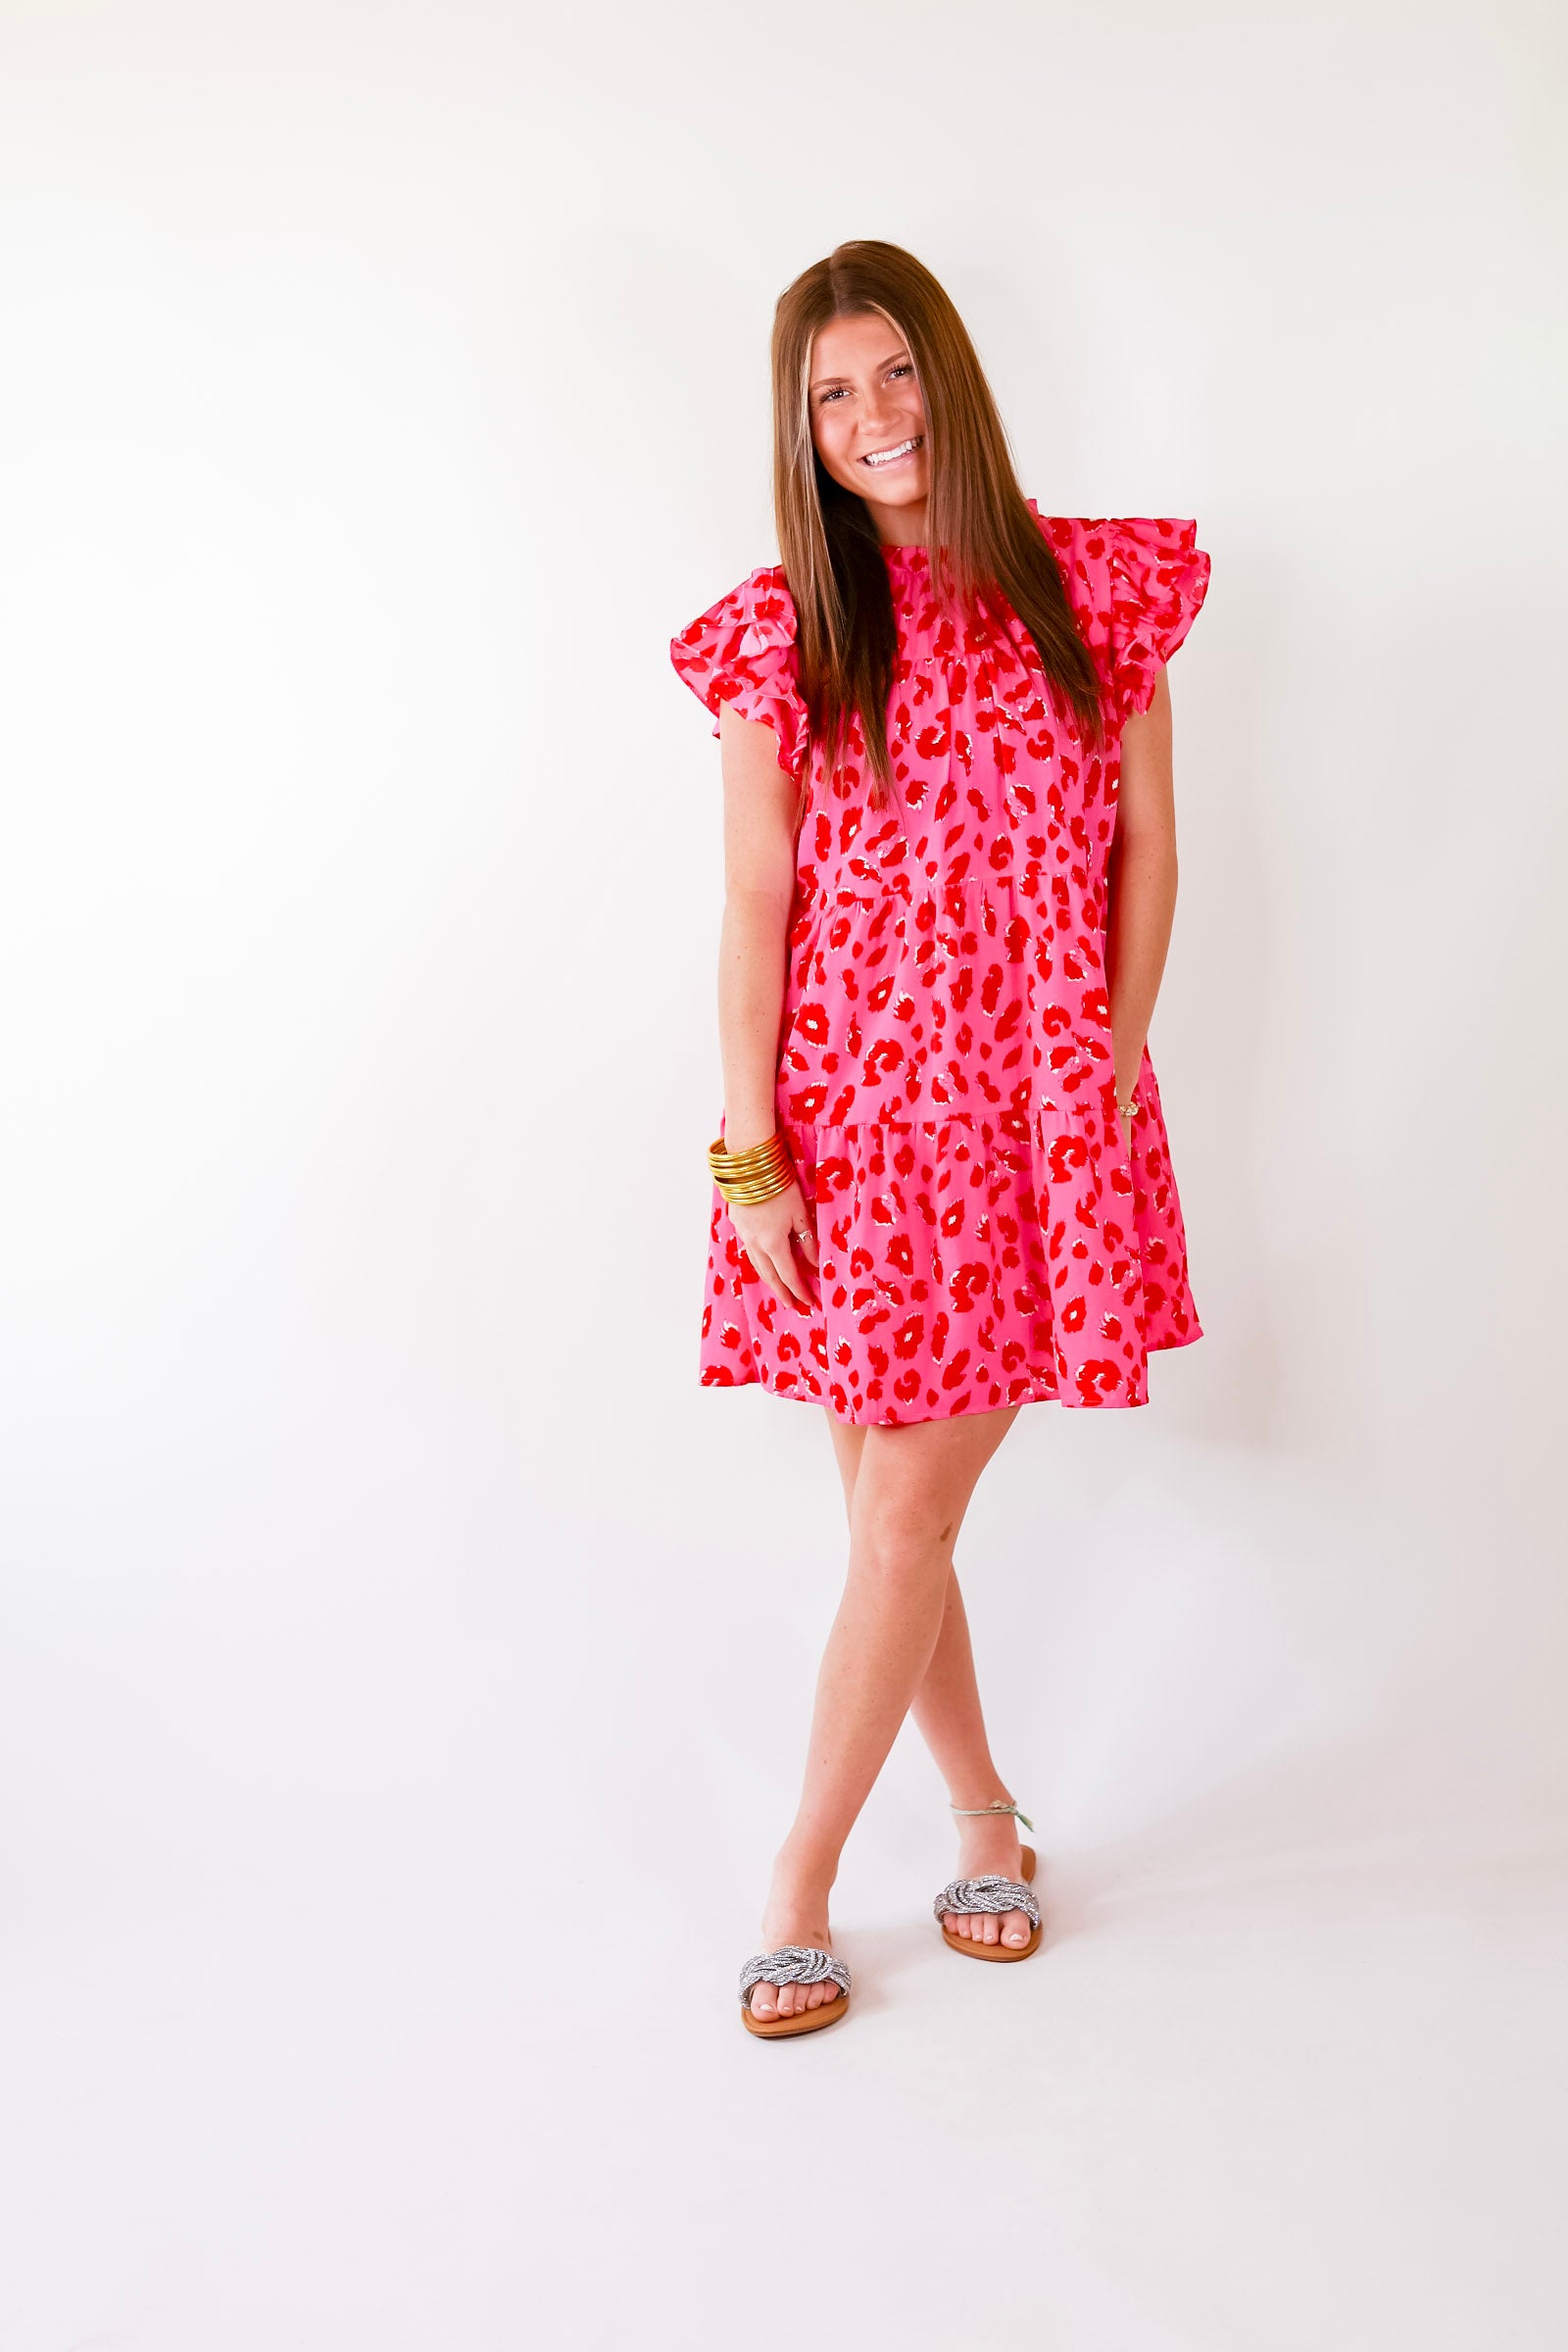 Daring and Delightful Leopard Print Dress with Ruffle Cap Sleeves in Pink